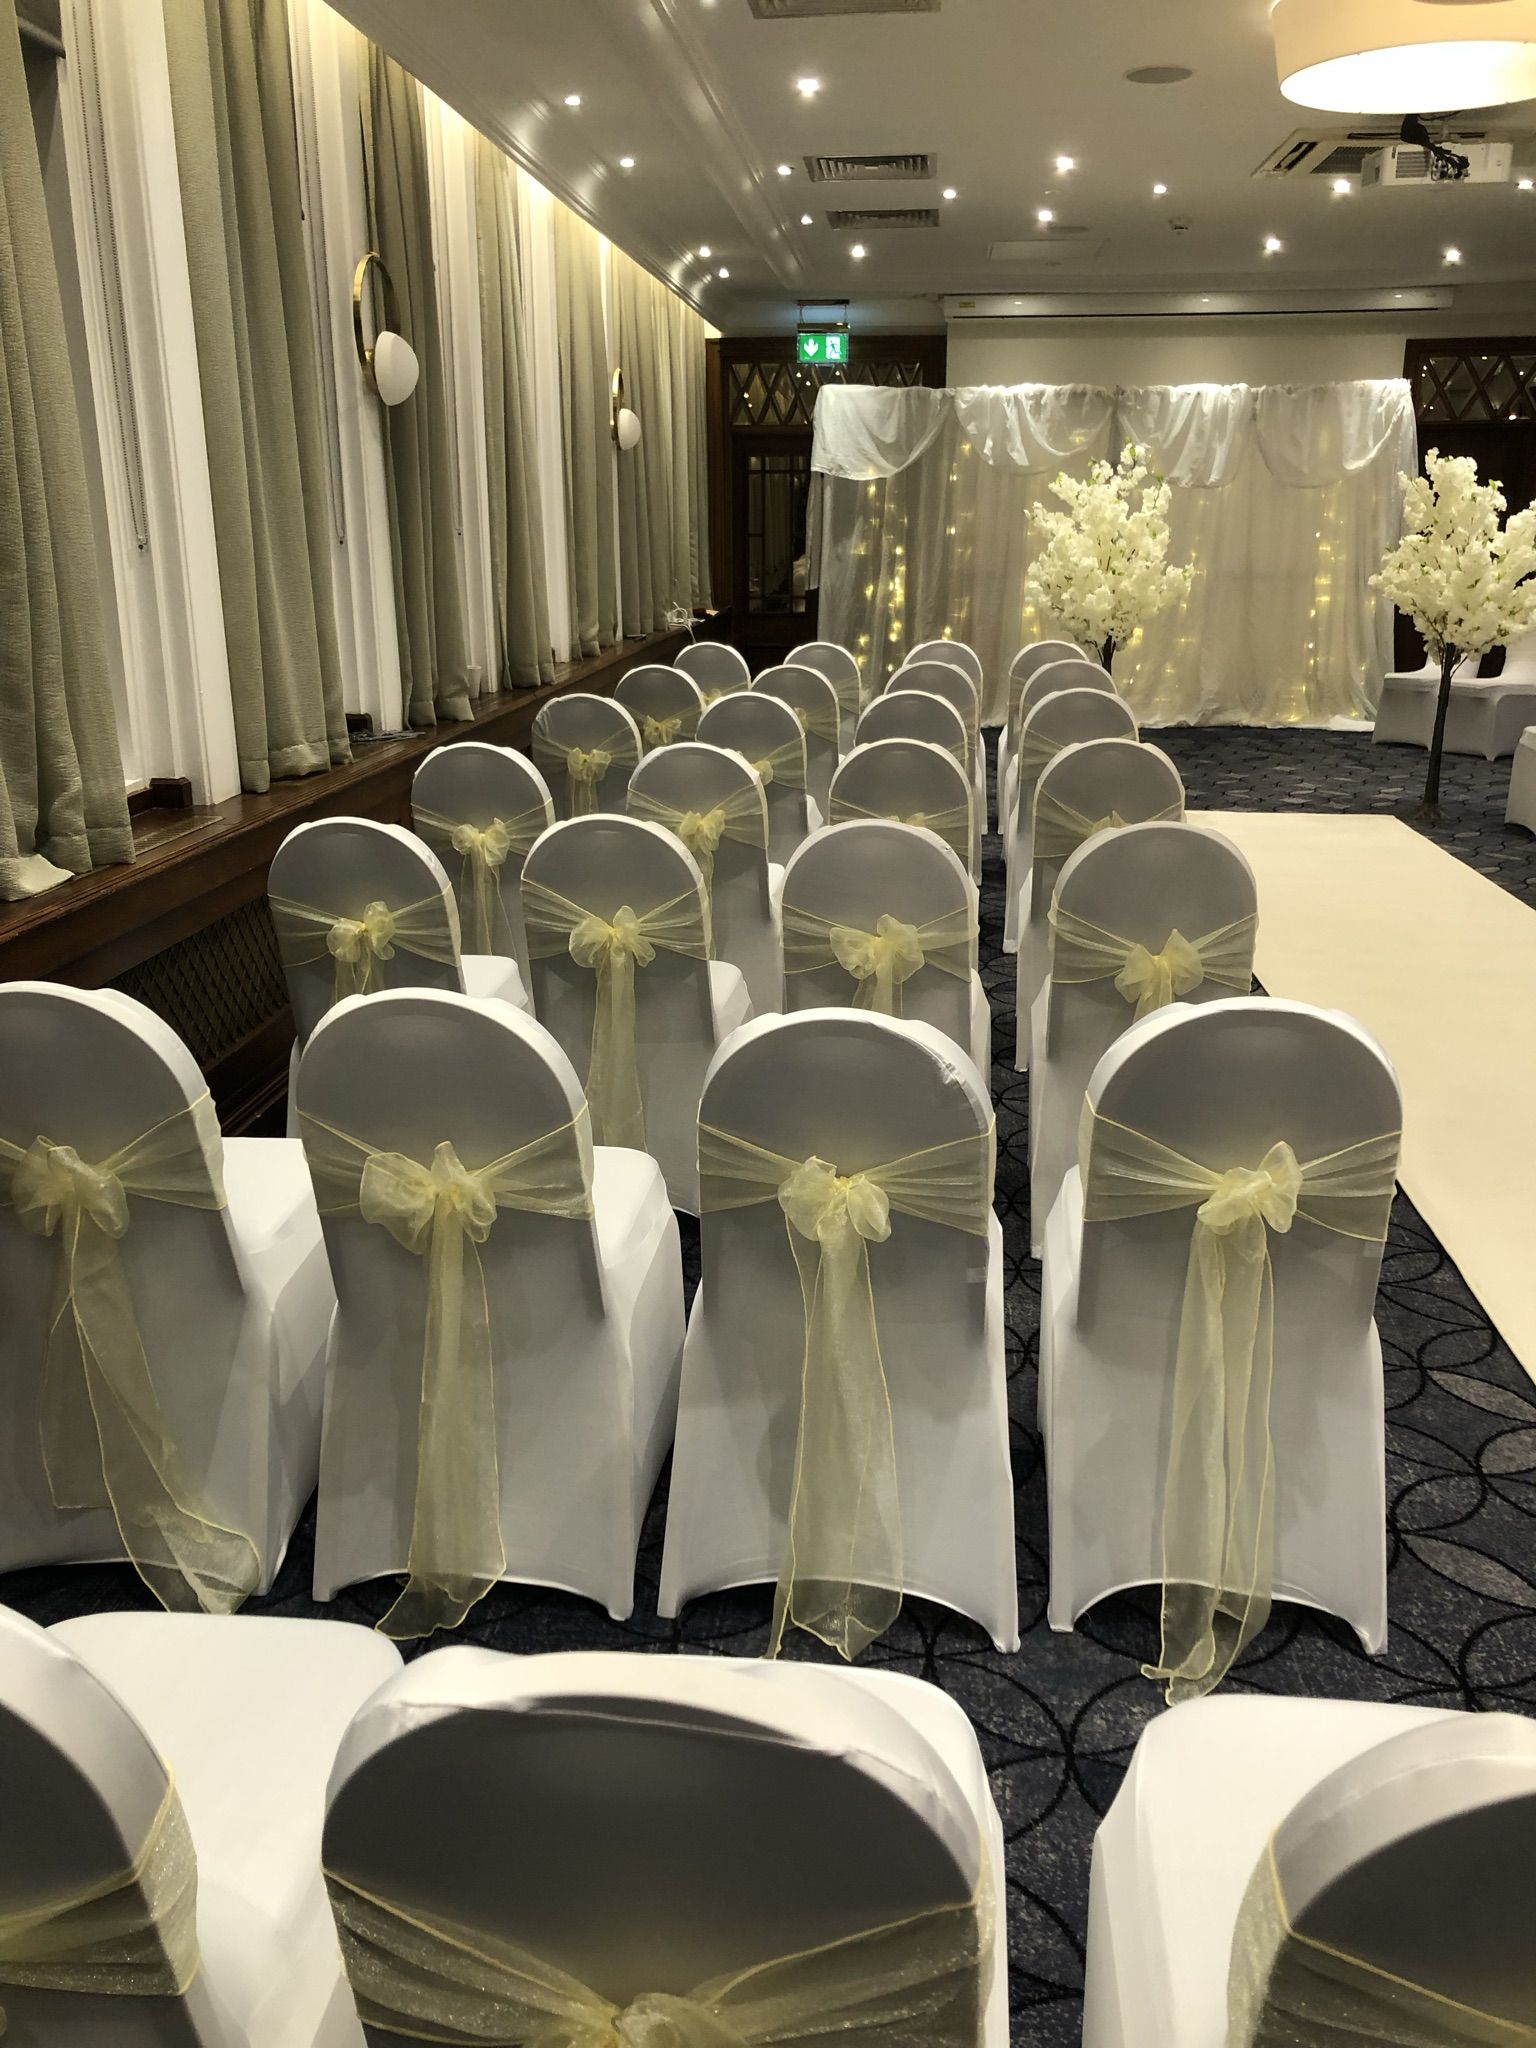 rows of white chairs with yellow sashes and bows.